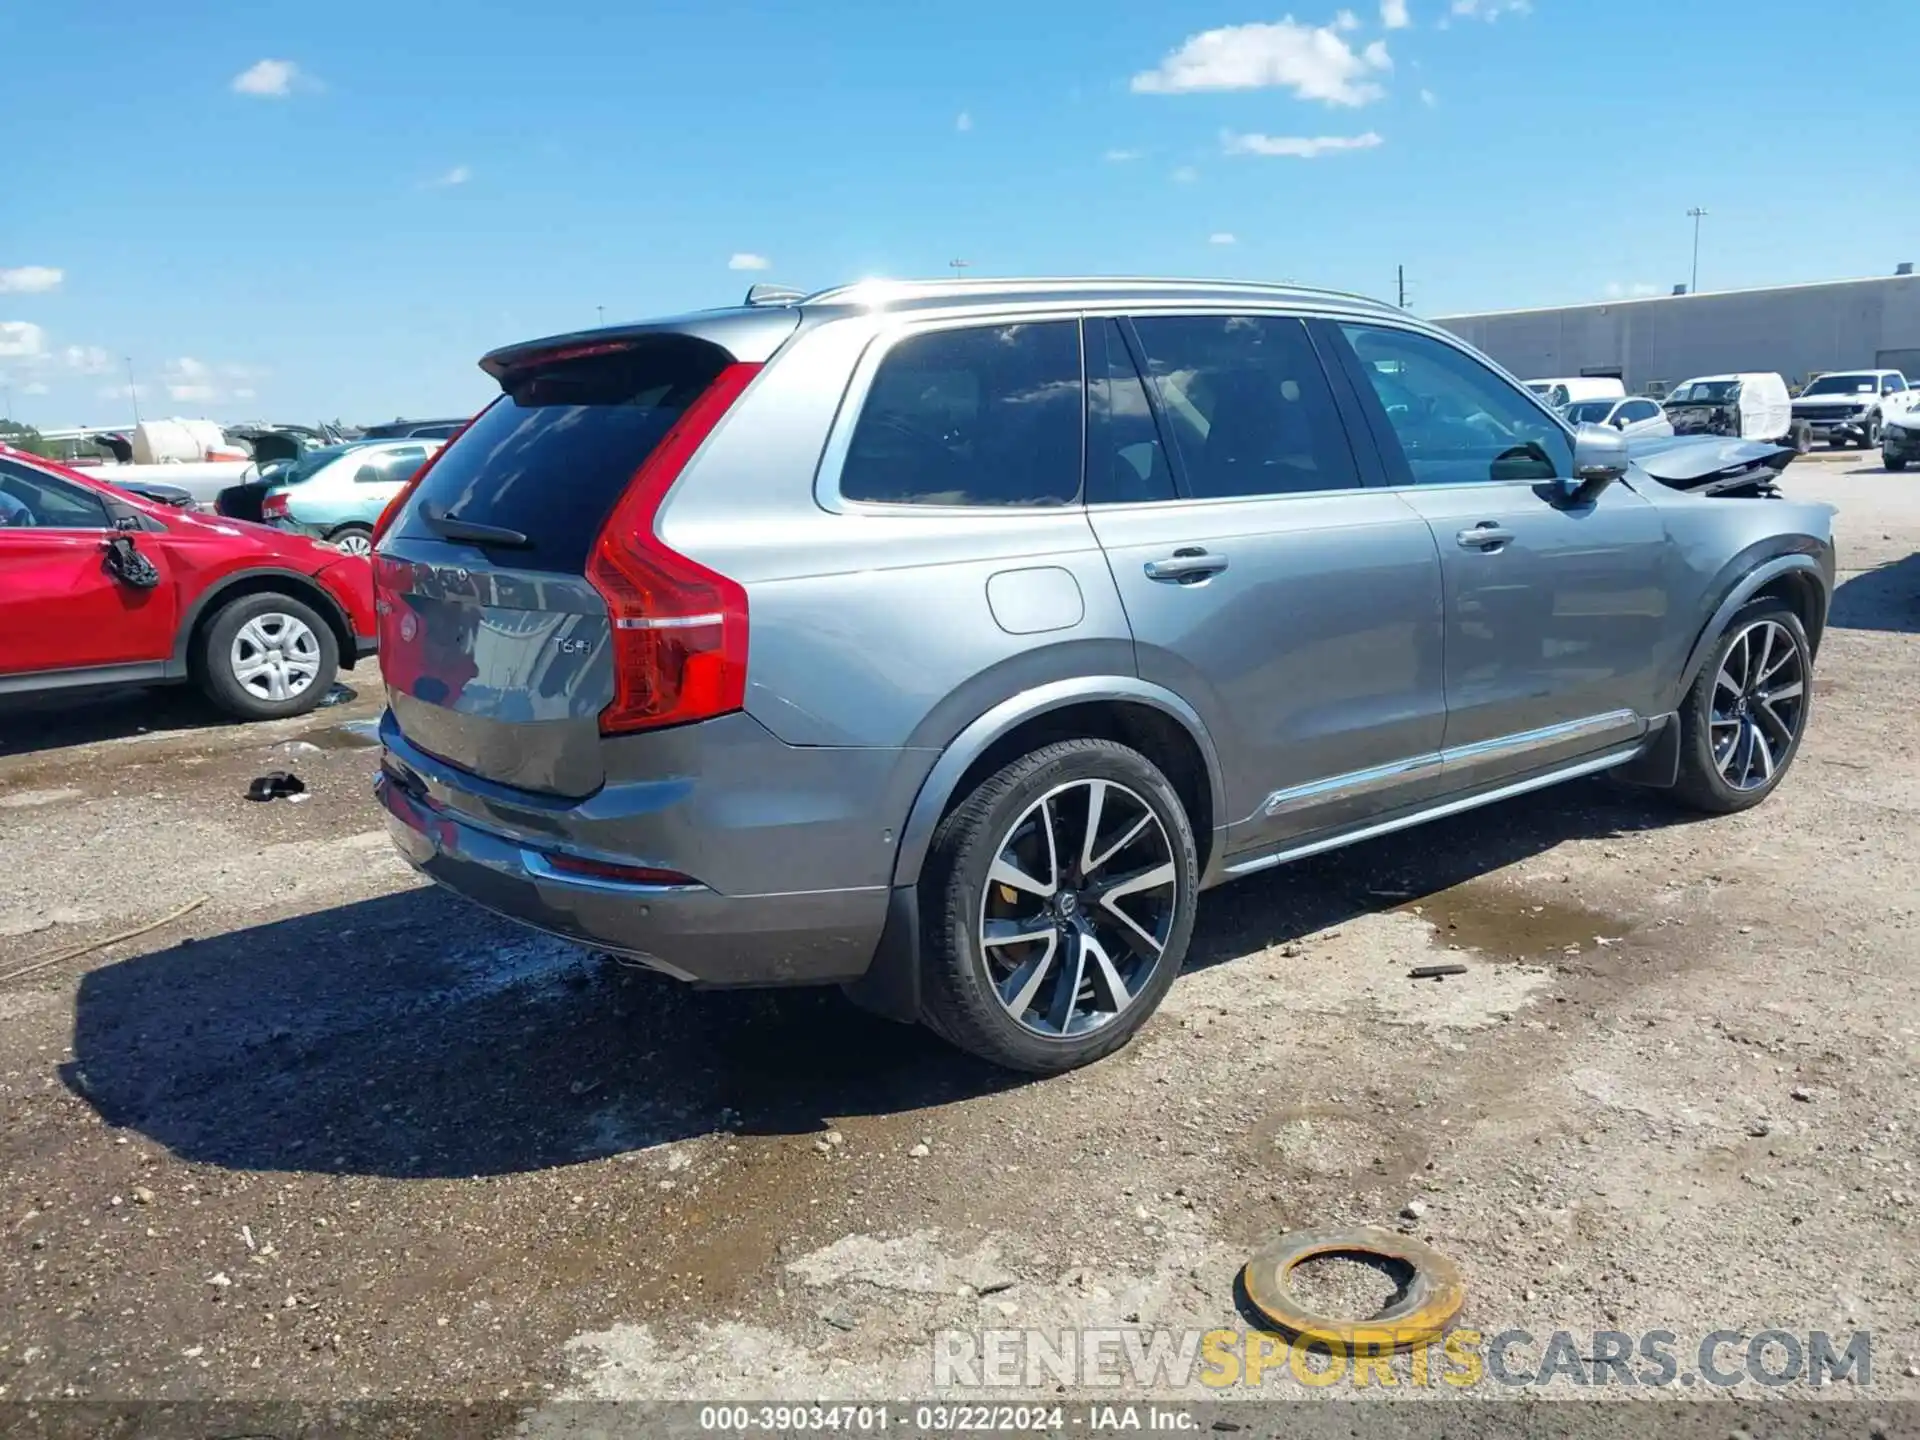 4 Photograph of a damaged car YV4A22PL8K1430475 VOLVO XC90 2019